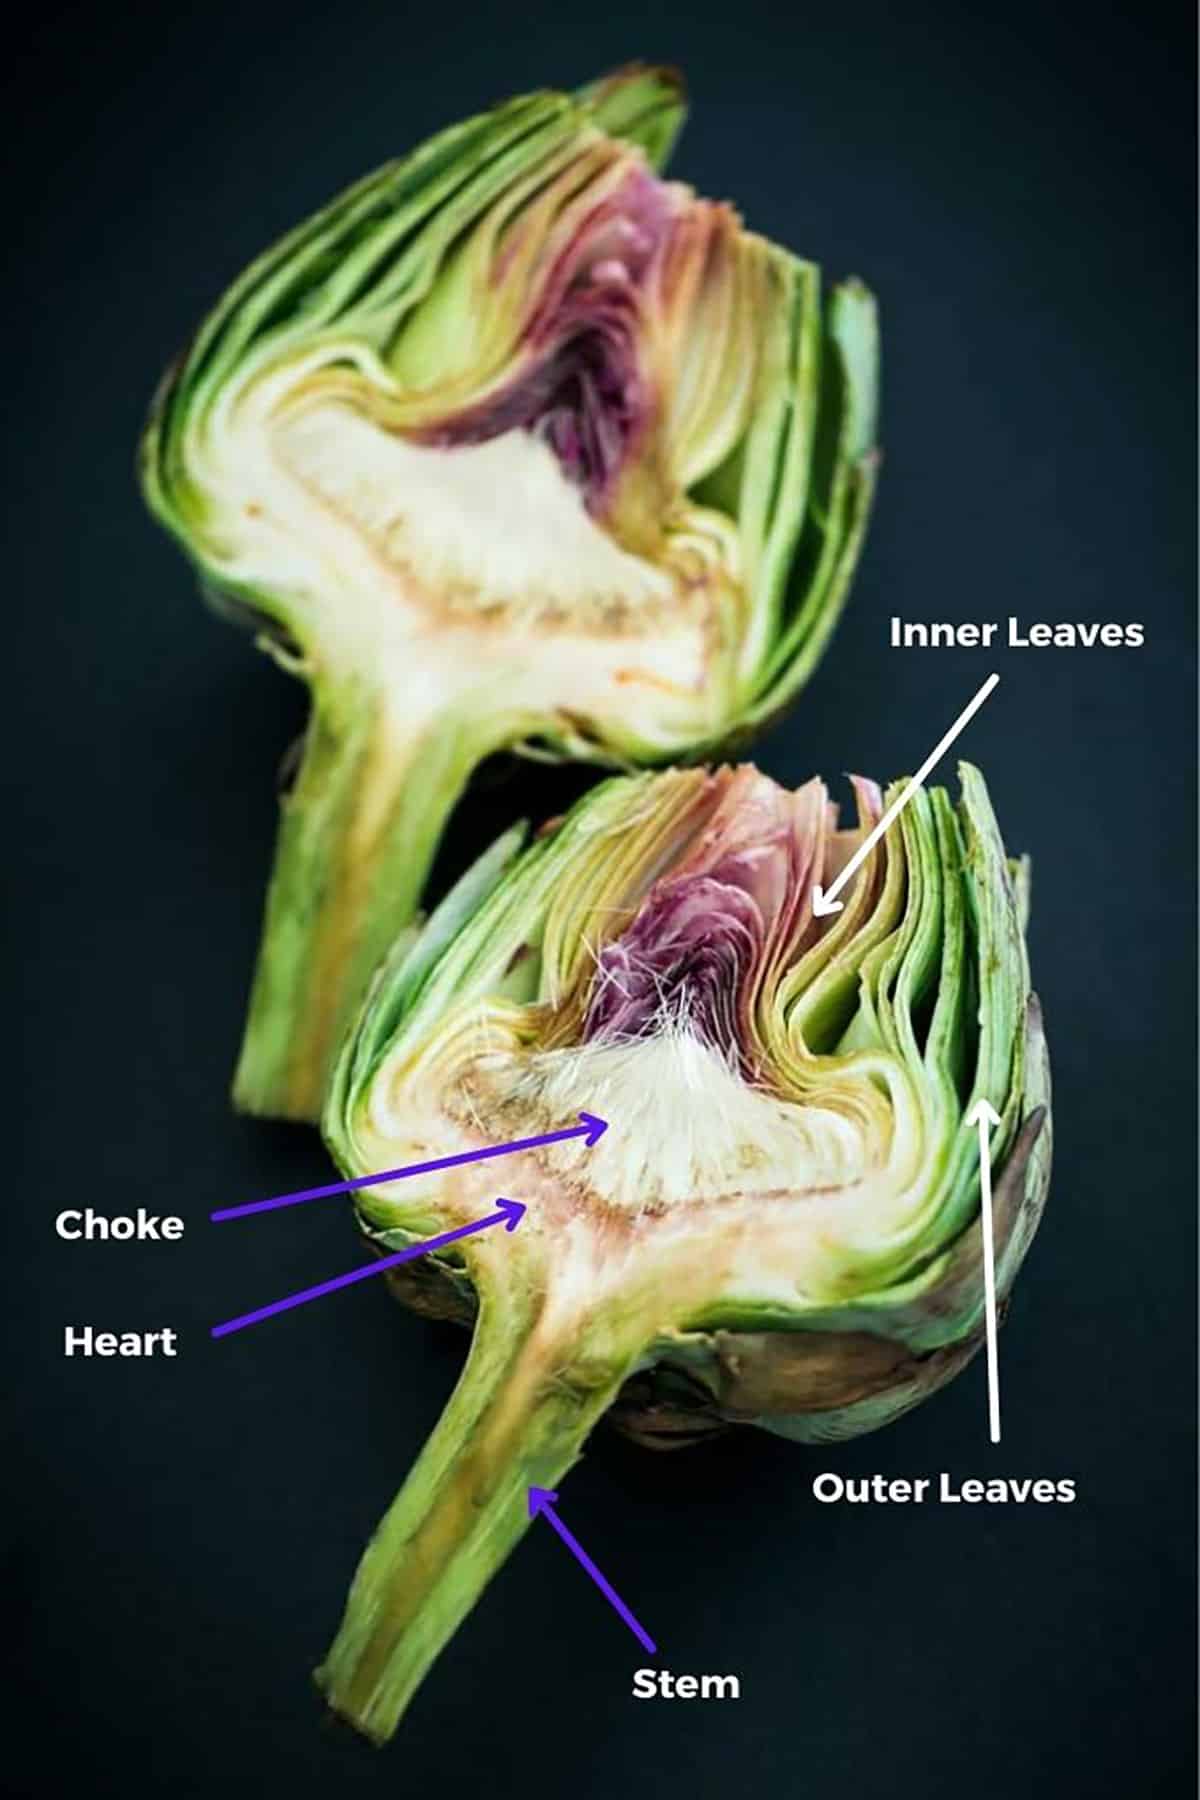 An artickoke cut in half showing the different parts of an artichoke